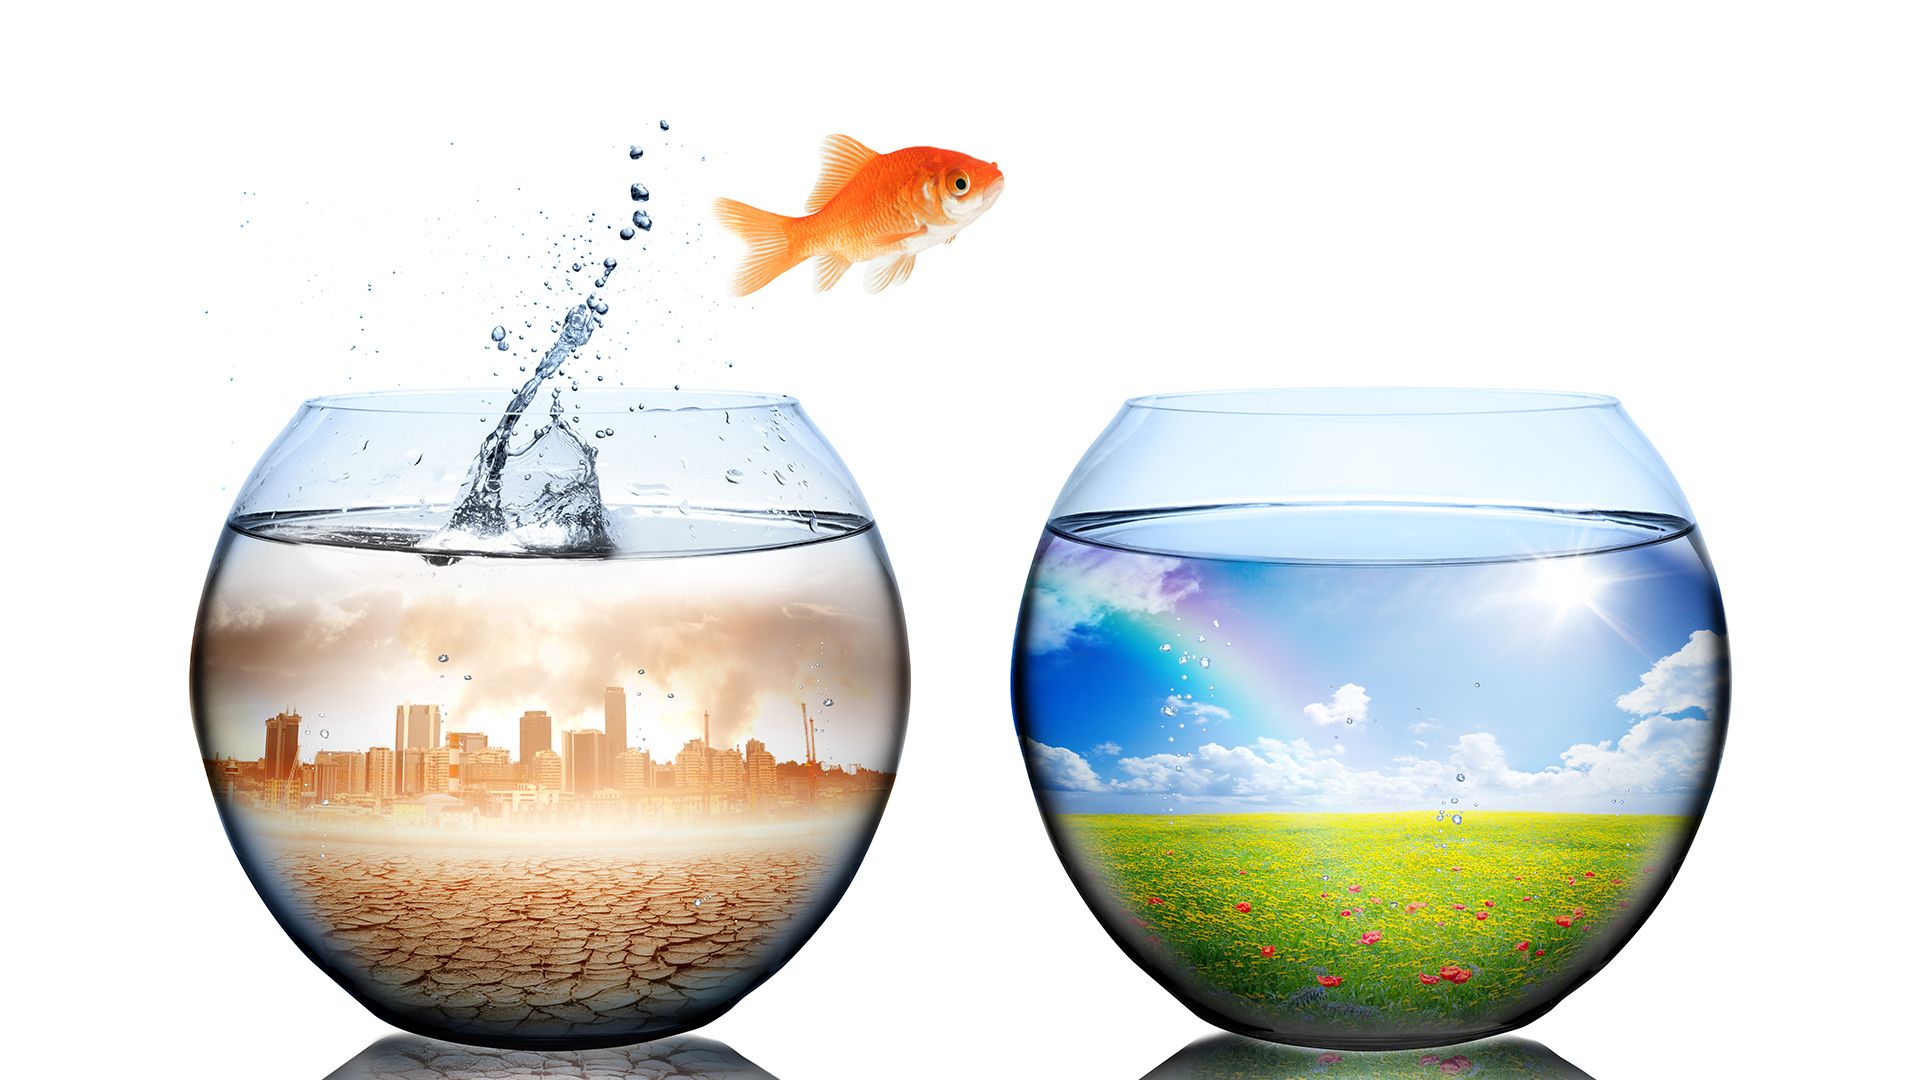 A goldfish jumps from pollution city-in-a-bowl to a green landscape-in-a-bowl